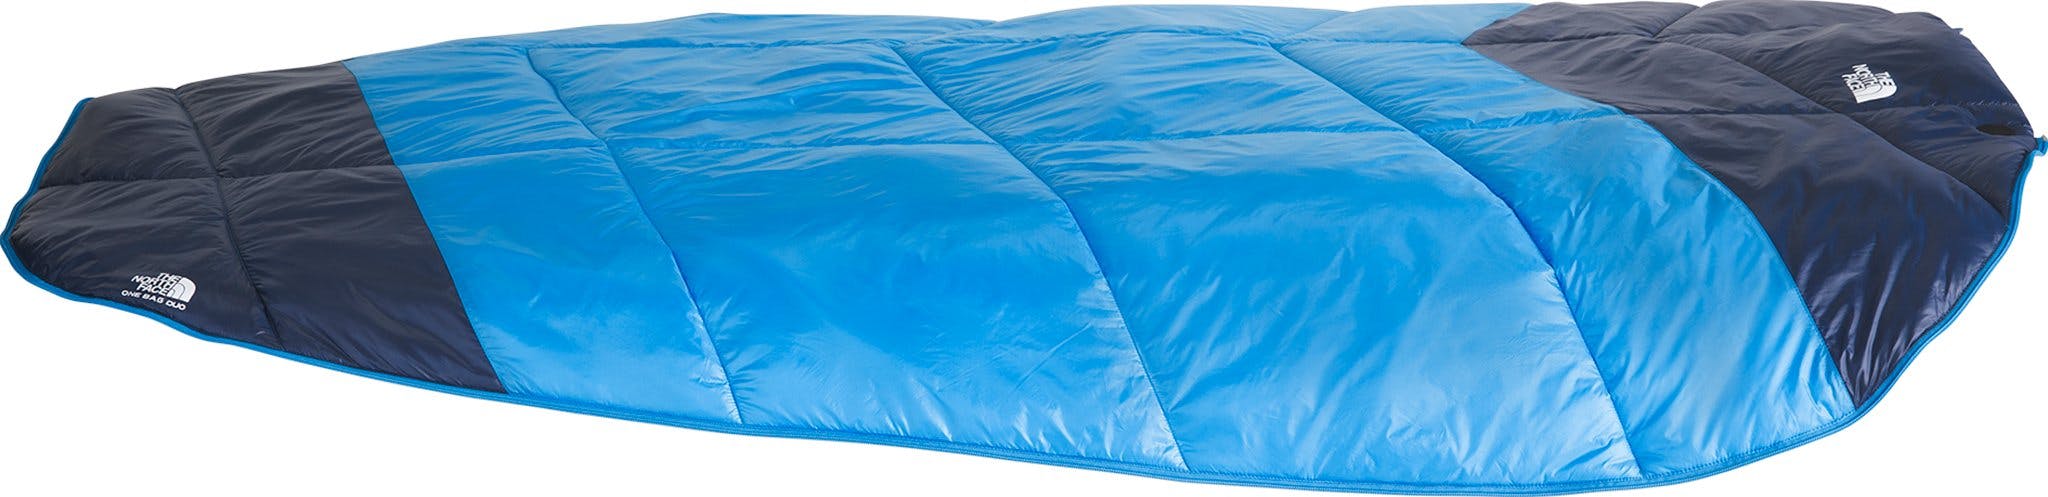 Product image for One Bag Duo Sleeping Bag 20°F/-7°C